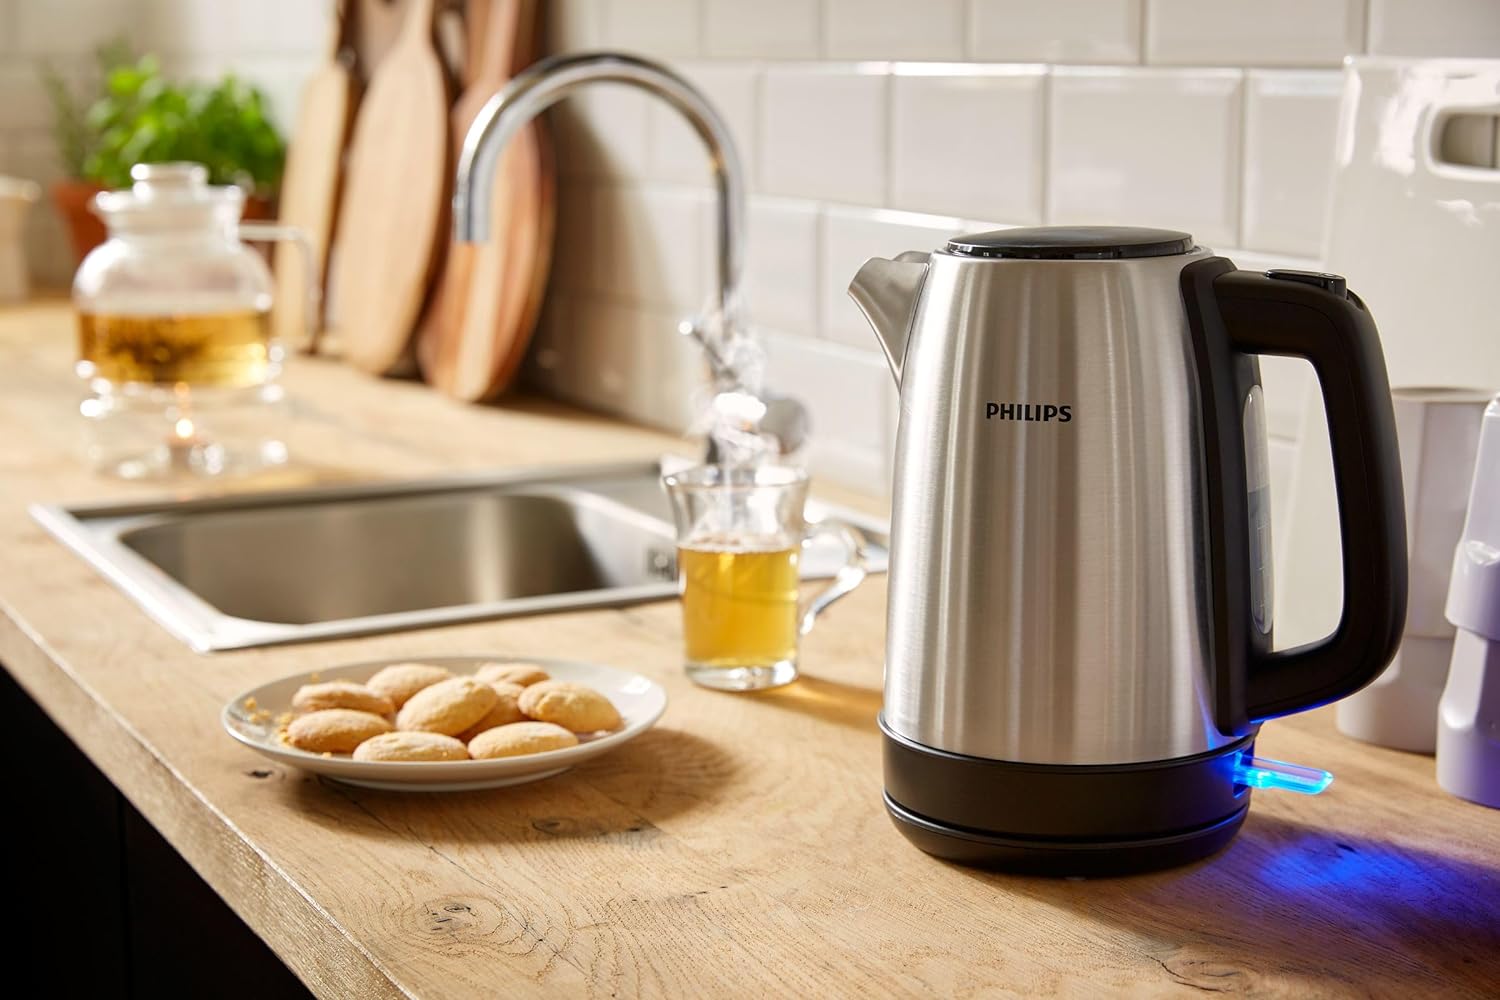 Philips Electric Kettle - 1.7L Capacity with Spring Lid and Indicator Light, Stainless Steel, Pirouette Base (HD9350/92), Silver - Amazing Gadgets Outlet